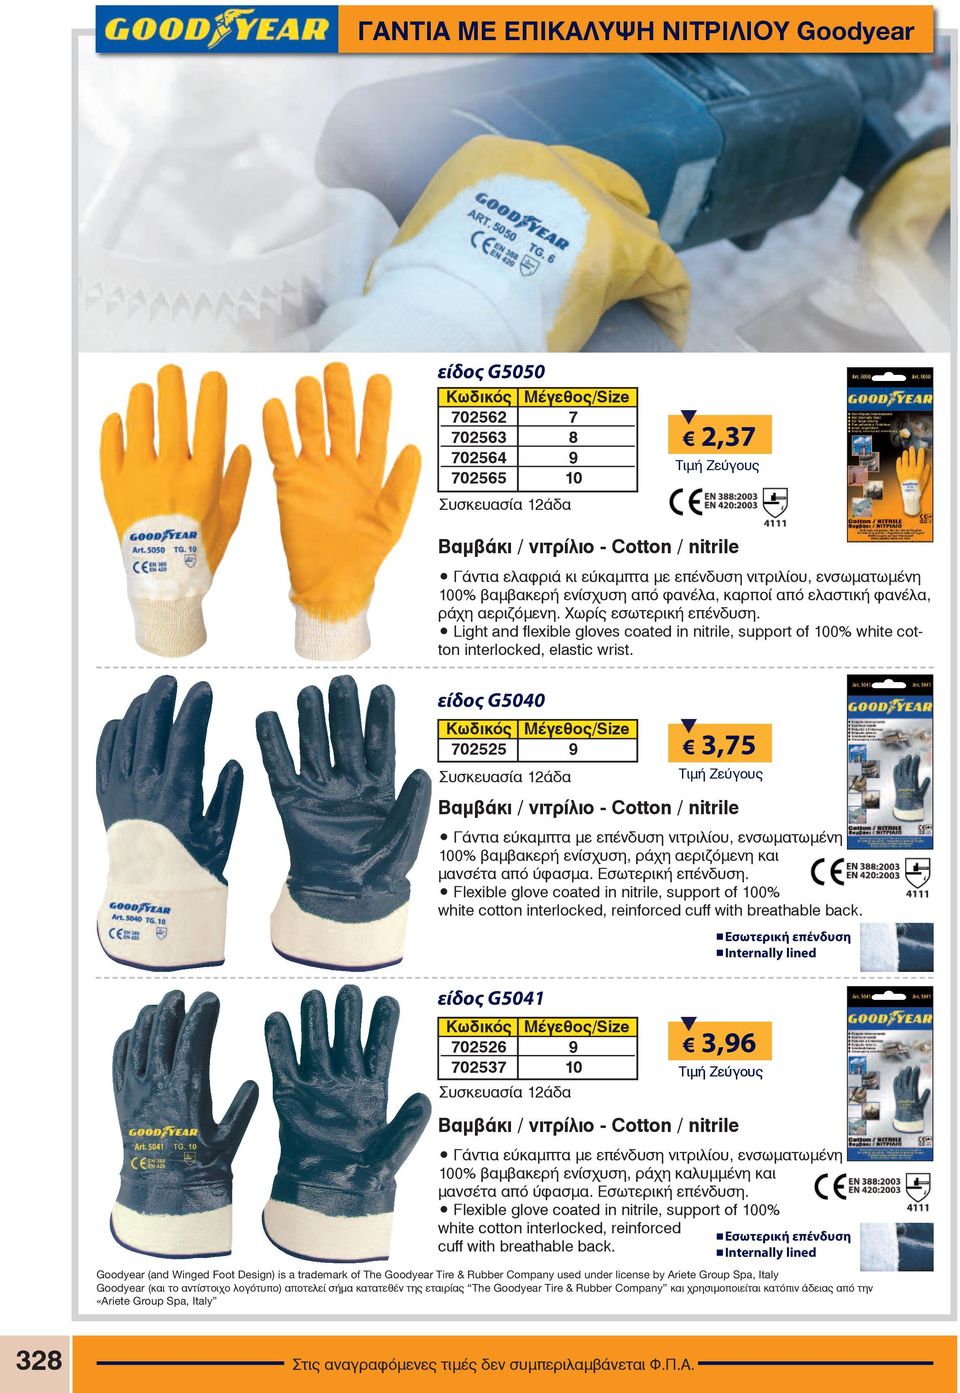 Light and flexible gloves coated in nitrile, support of 100% white cotton interlocked, elastic wrist.